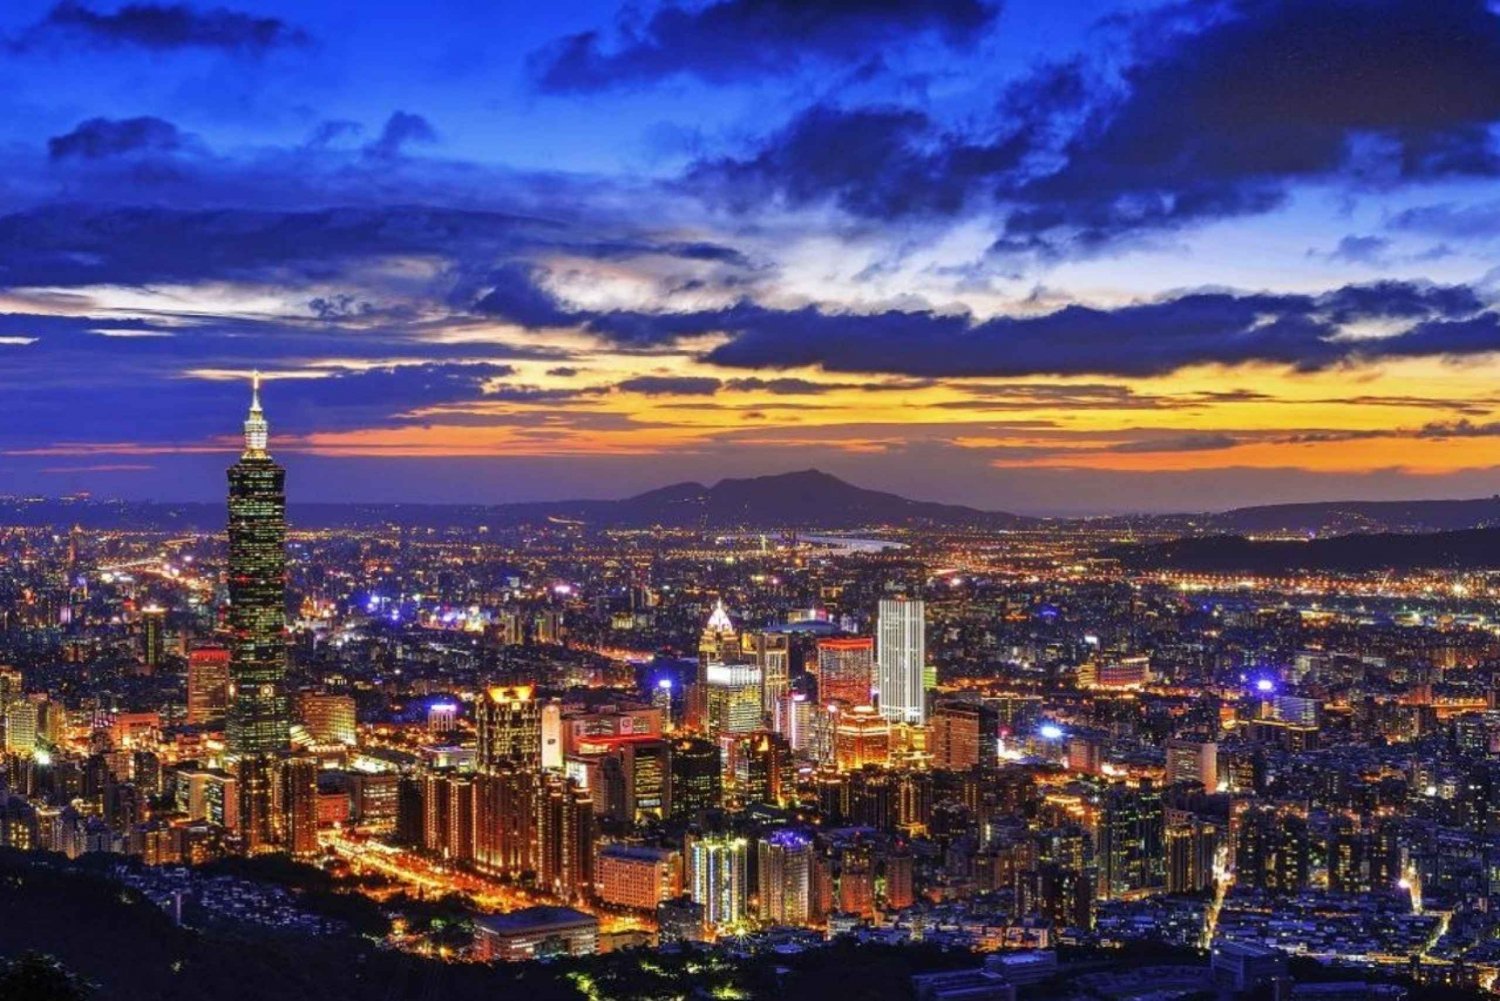 Taipei Unlimited Fun Pass: 25 Attractions, Transports & More